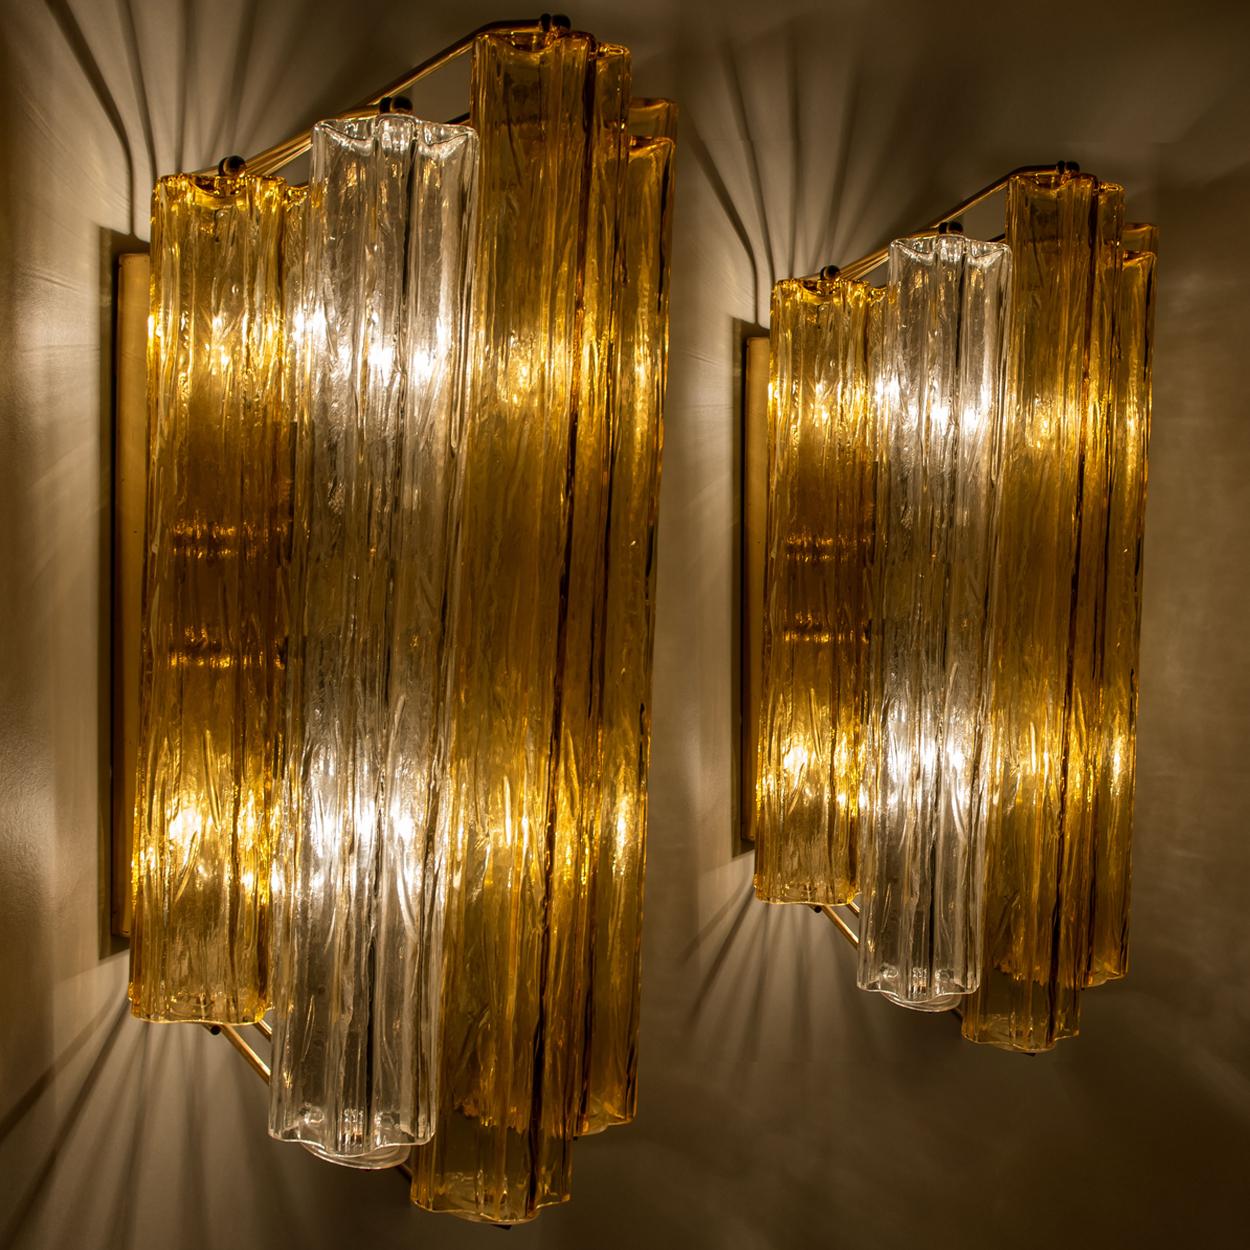 2 of the 2 Extra Large Wall Sconces or Wall Lights Murano Glass, Barovier & Toso 2